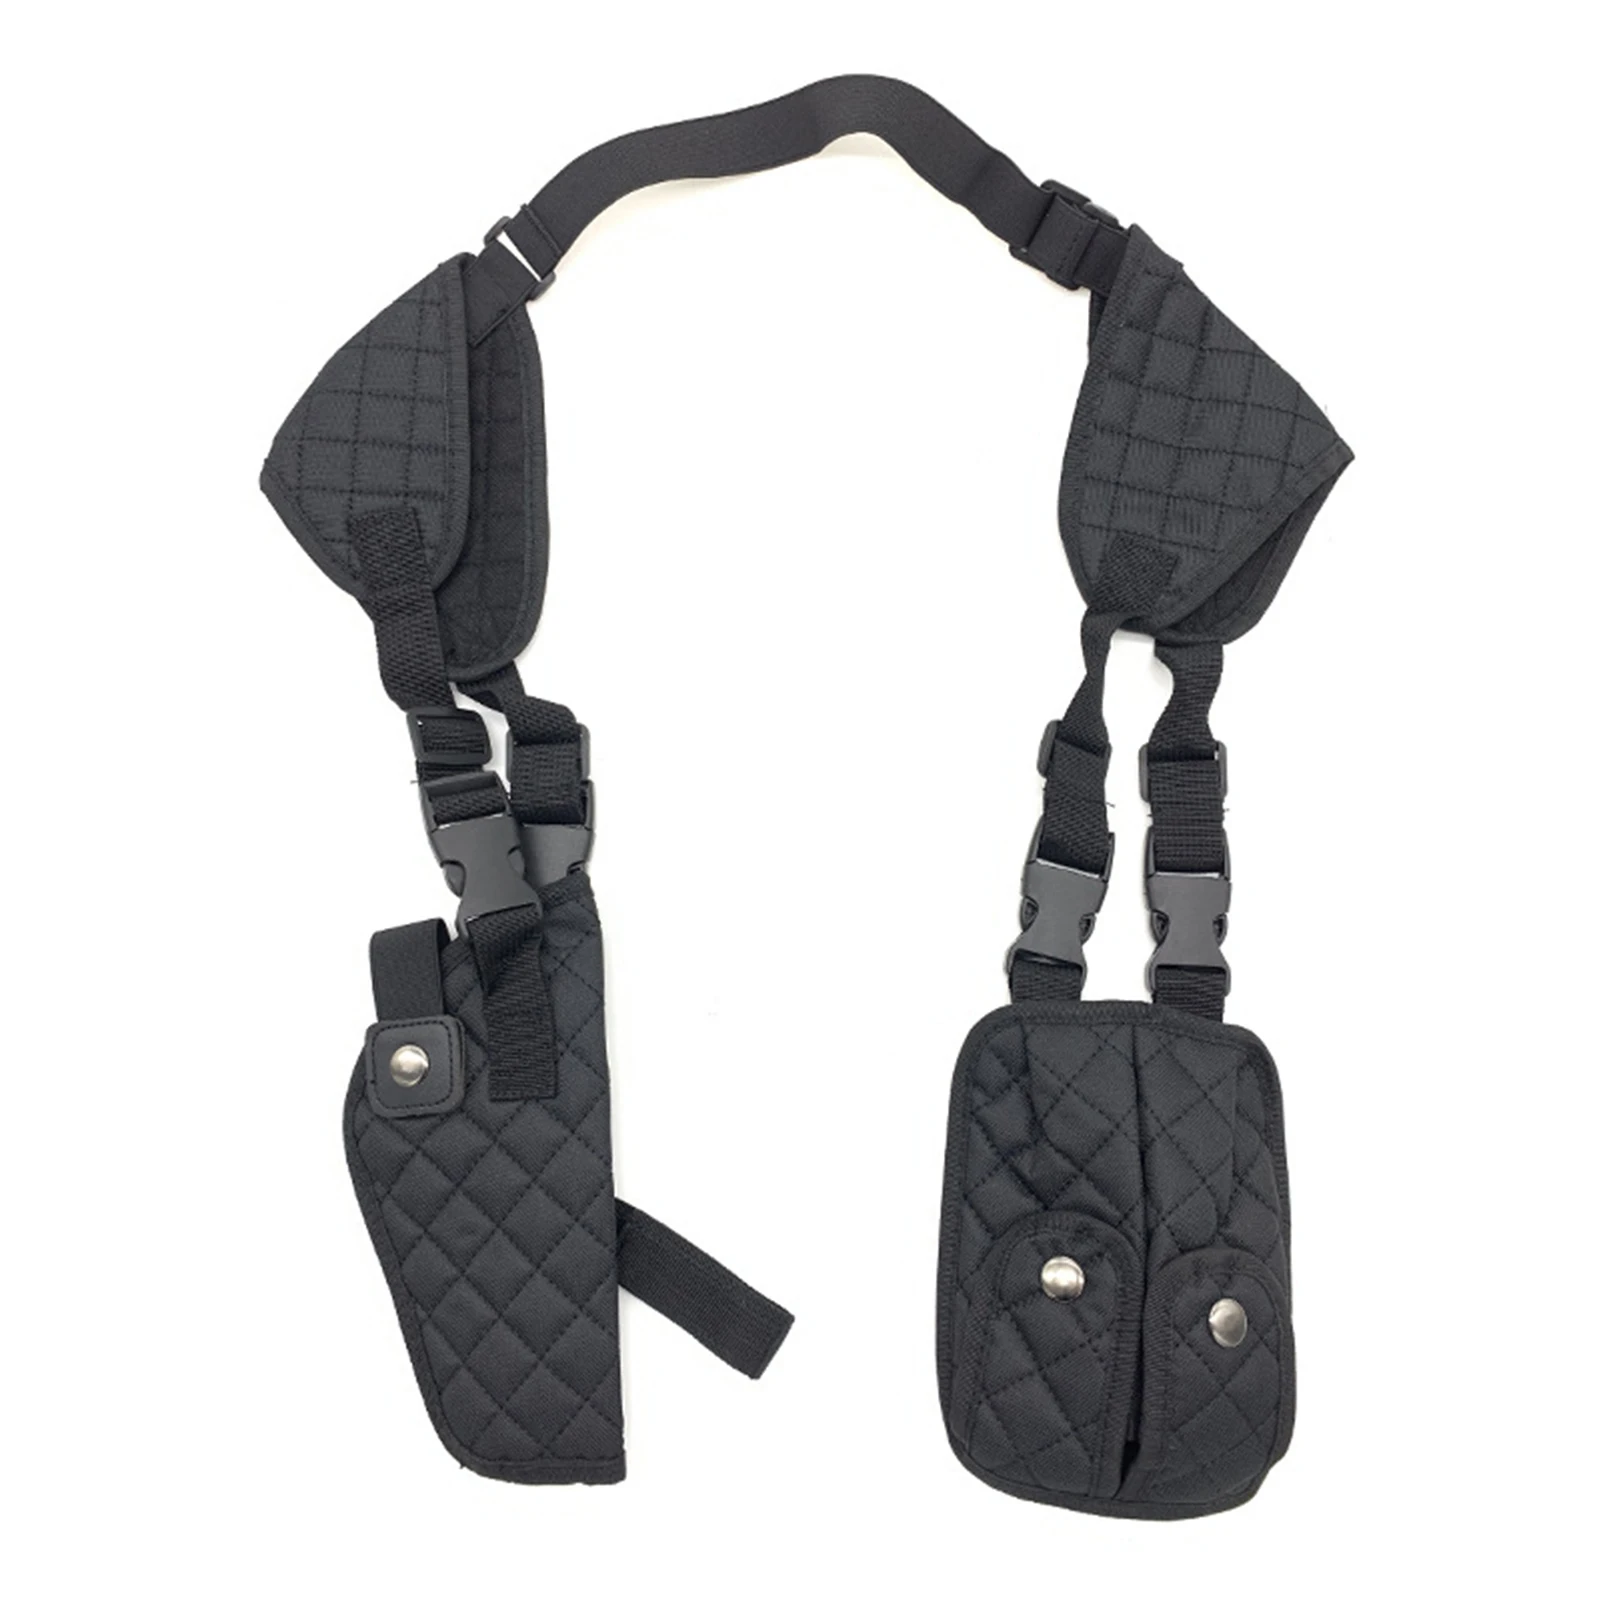 

Portable Outdoor Tacticals Shoulder Holster Hiddens Under The Arms Double Magazine Holster Bags Light Invisible Agents